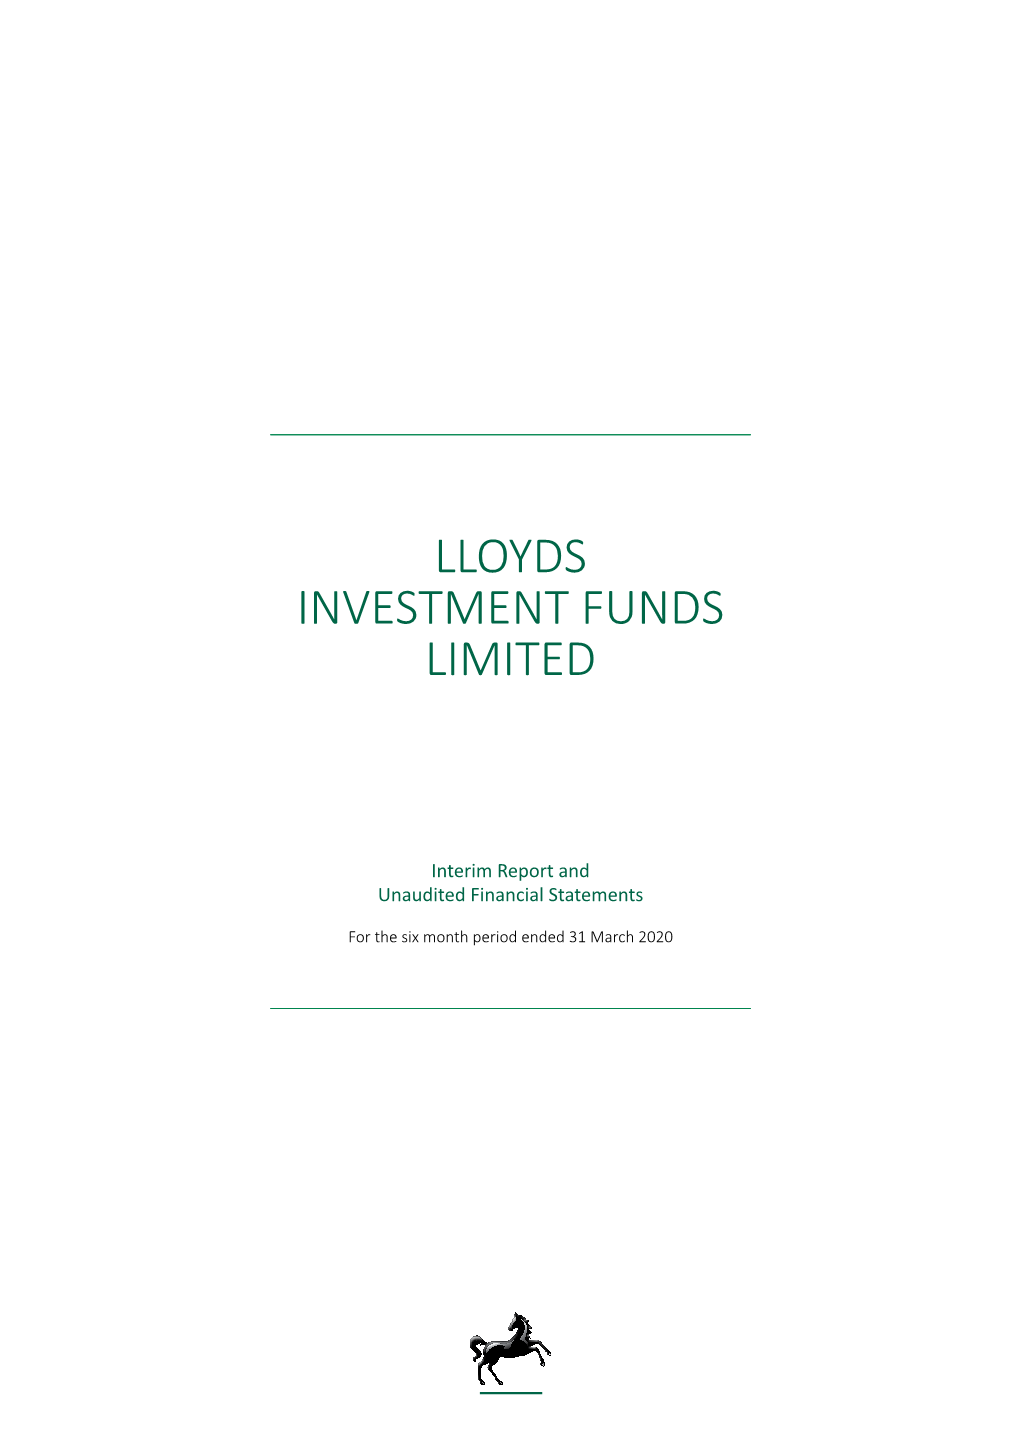 Lloyds Investment Funds Limited